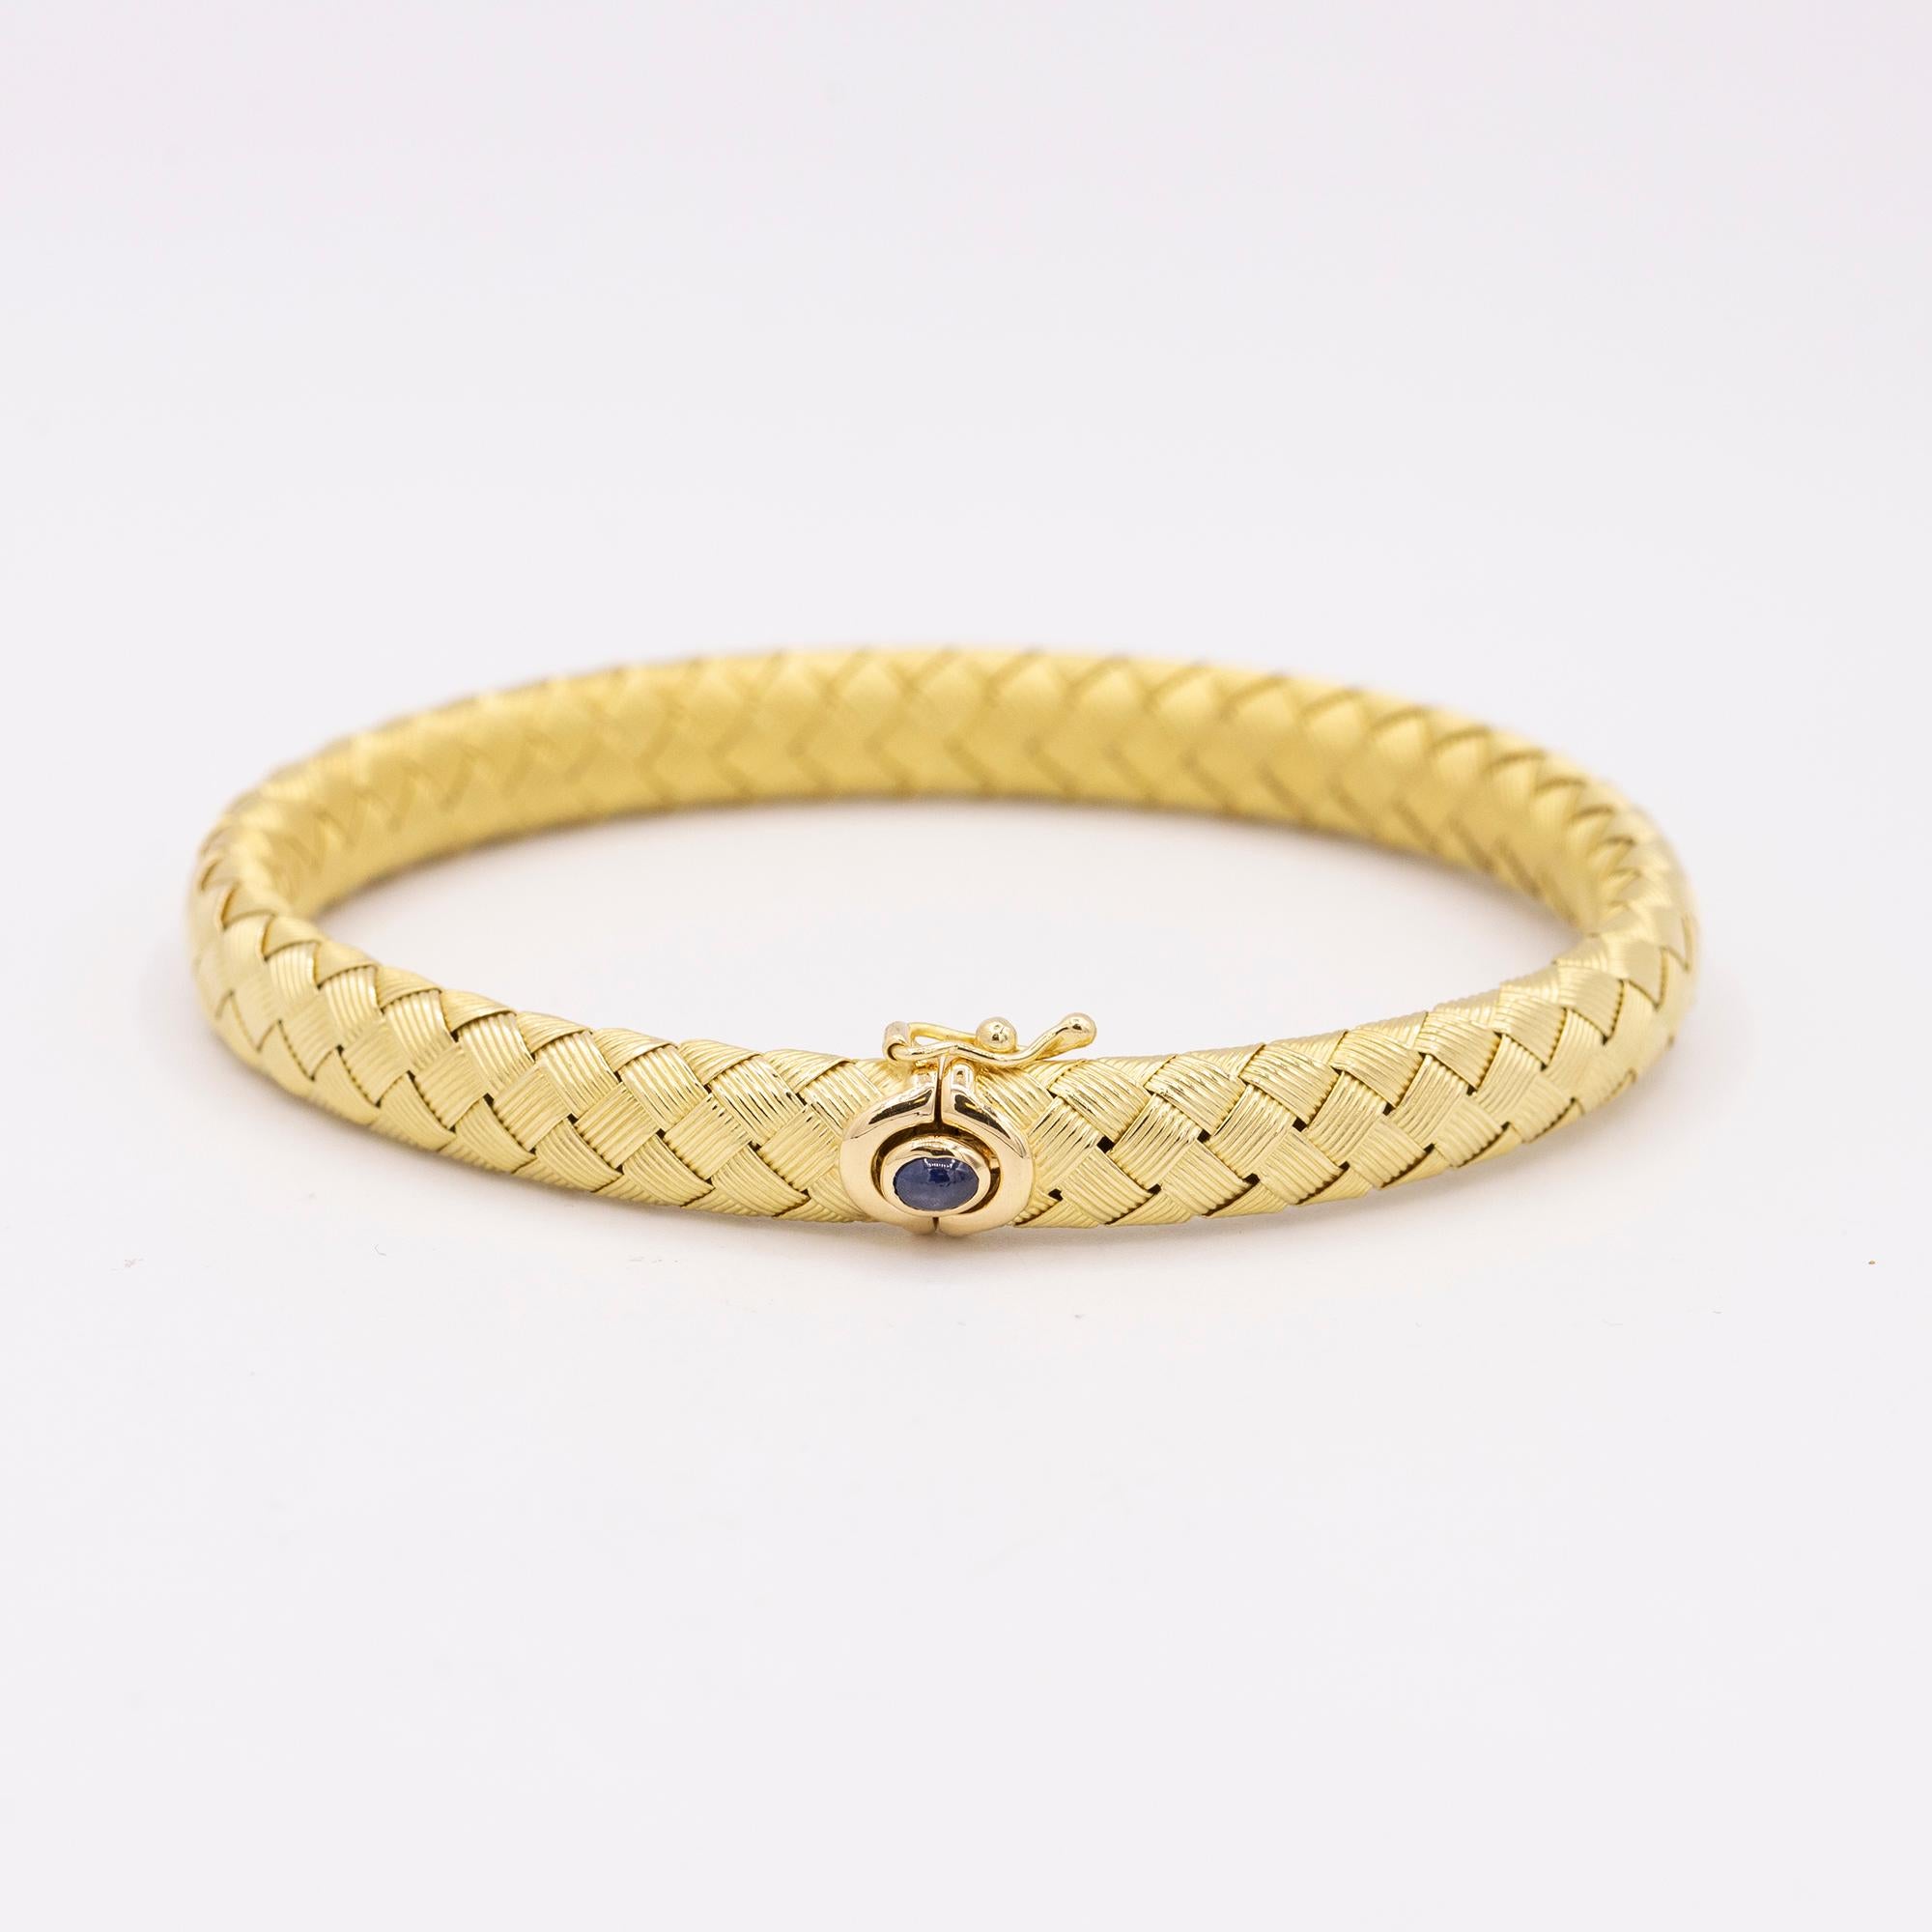 18 karat yellow gold braided bracelet with flexible construction with blue cabochon sapphire.

